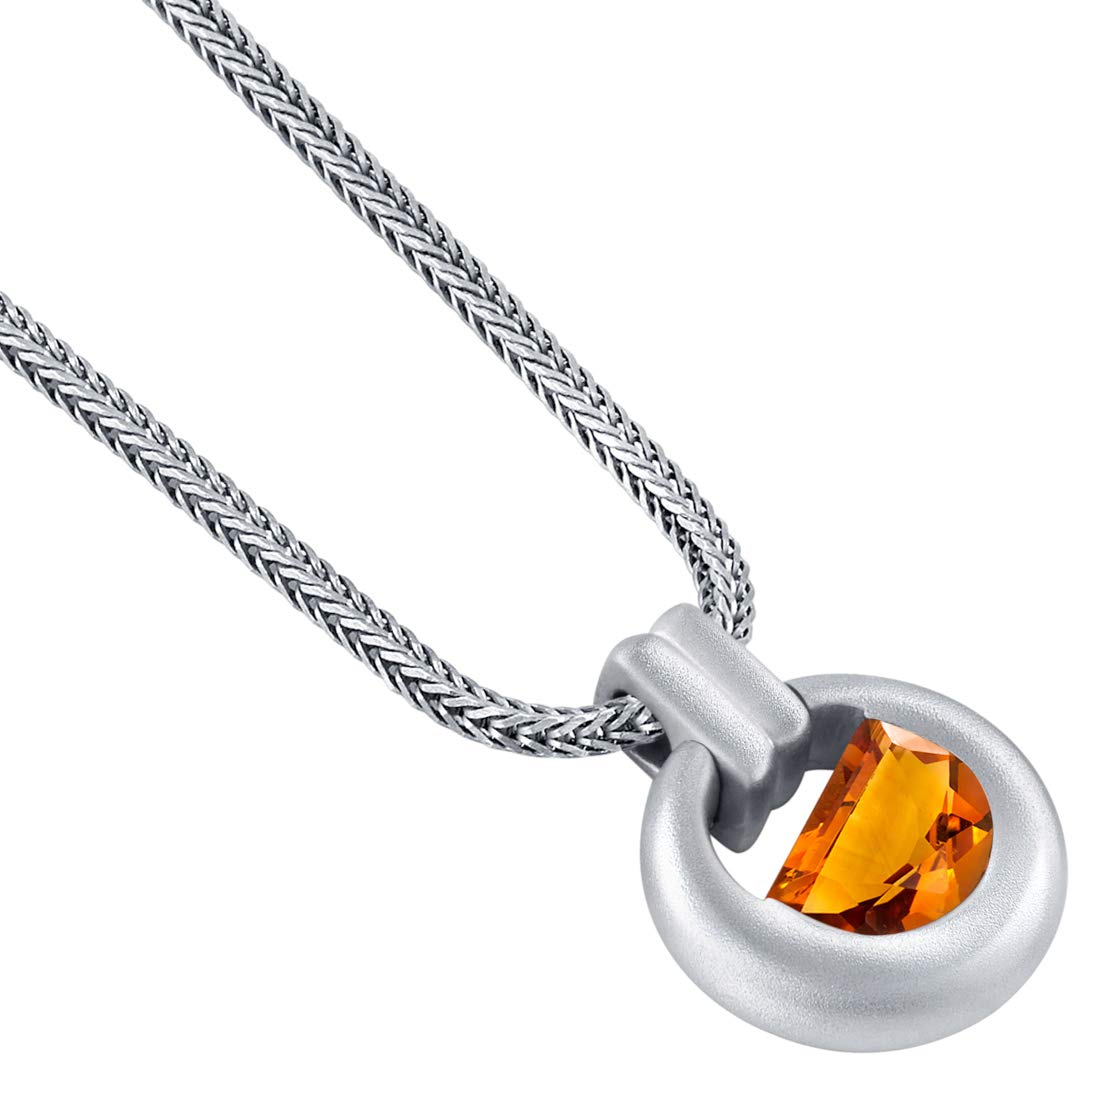 Peora Citrine Amulet Pendant Necklace for Men in Sterling Silver, 3 Carats Half Moon Shape, Brushed Finished, with 22-Inch Italian Chain